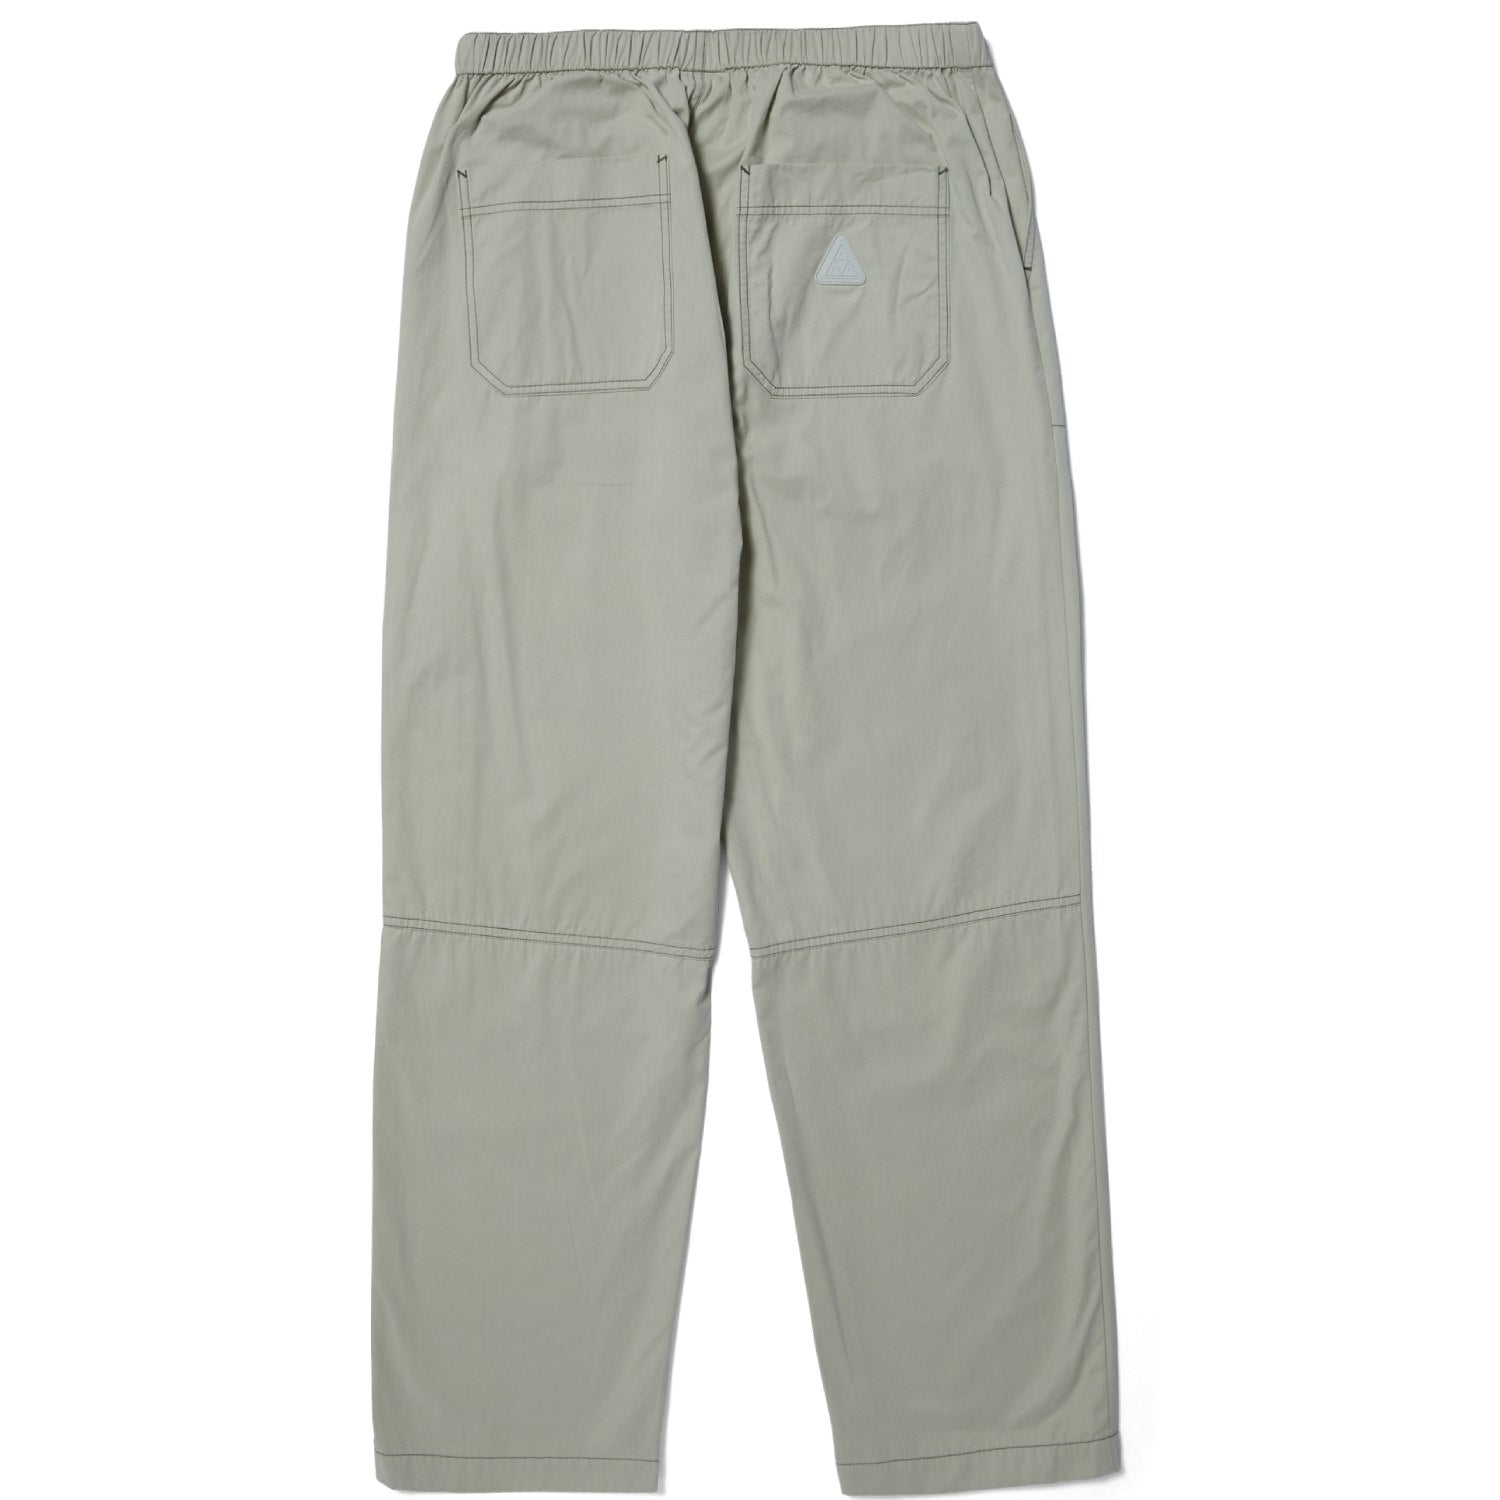 HUF - Loma Tech Pants - Biscuit